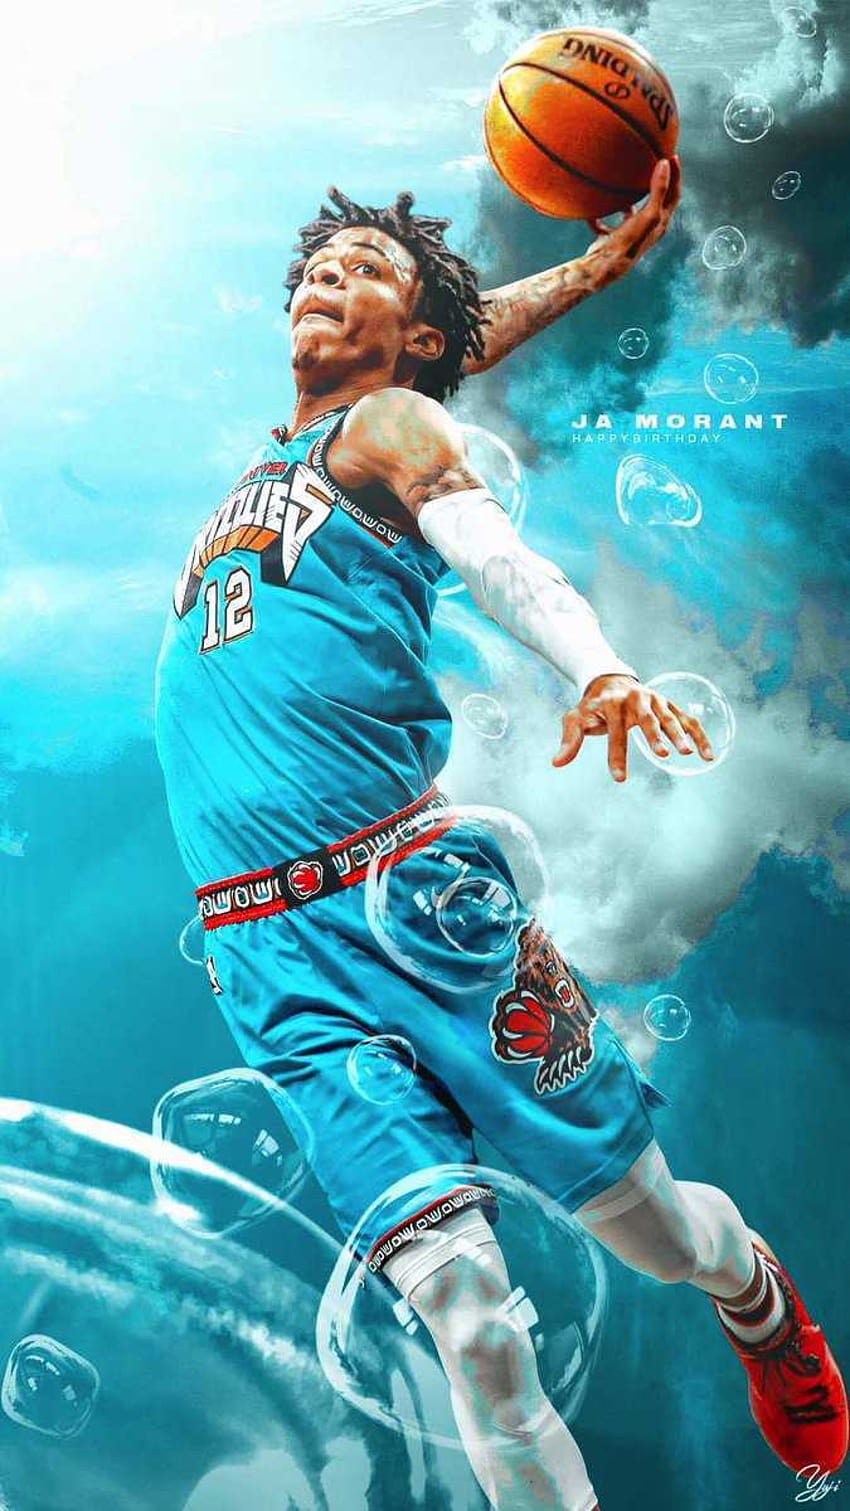 Ja Morant Wallpaper Discover more American Professional Basketball Player  College Ja Morant National Baske  Basketball wallpaper Nba wallpapers  Nba pictures